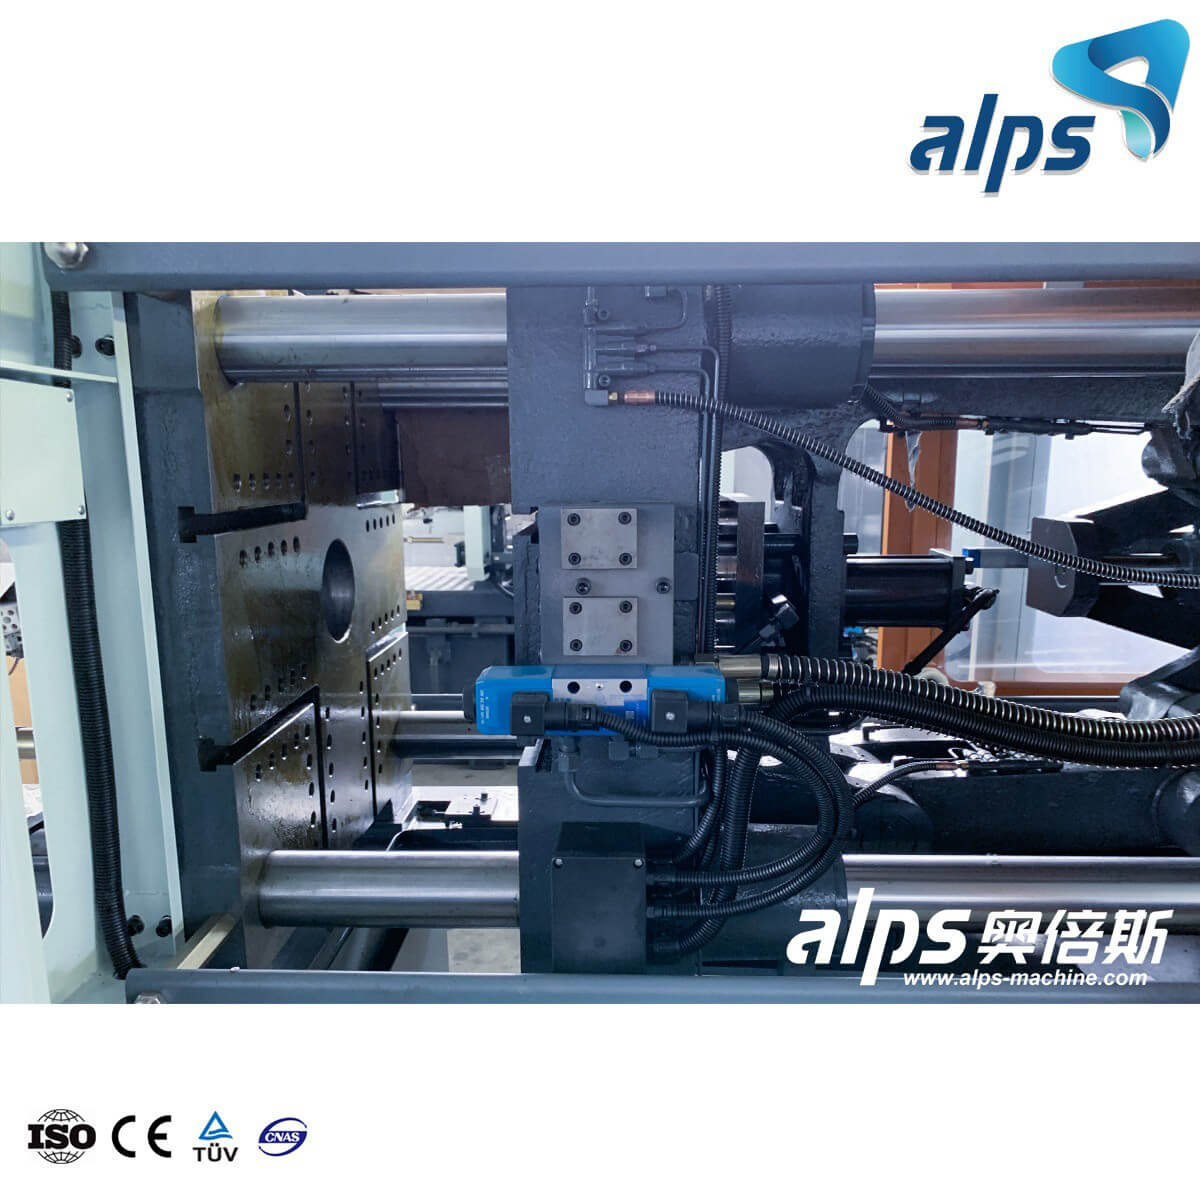 Automatic Plastic Injection Moulding Machine (INJ2400A)